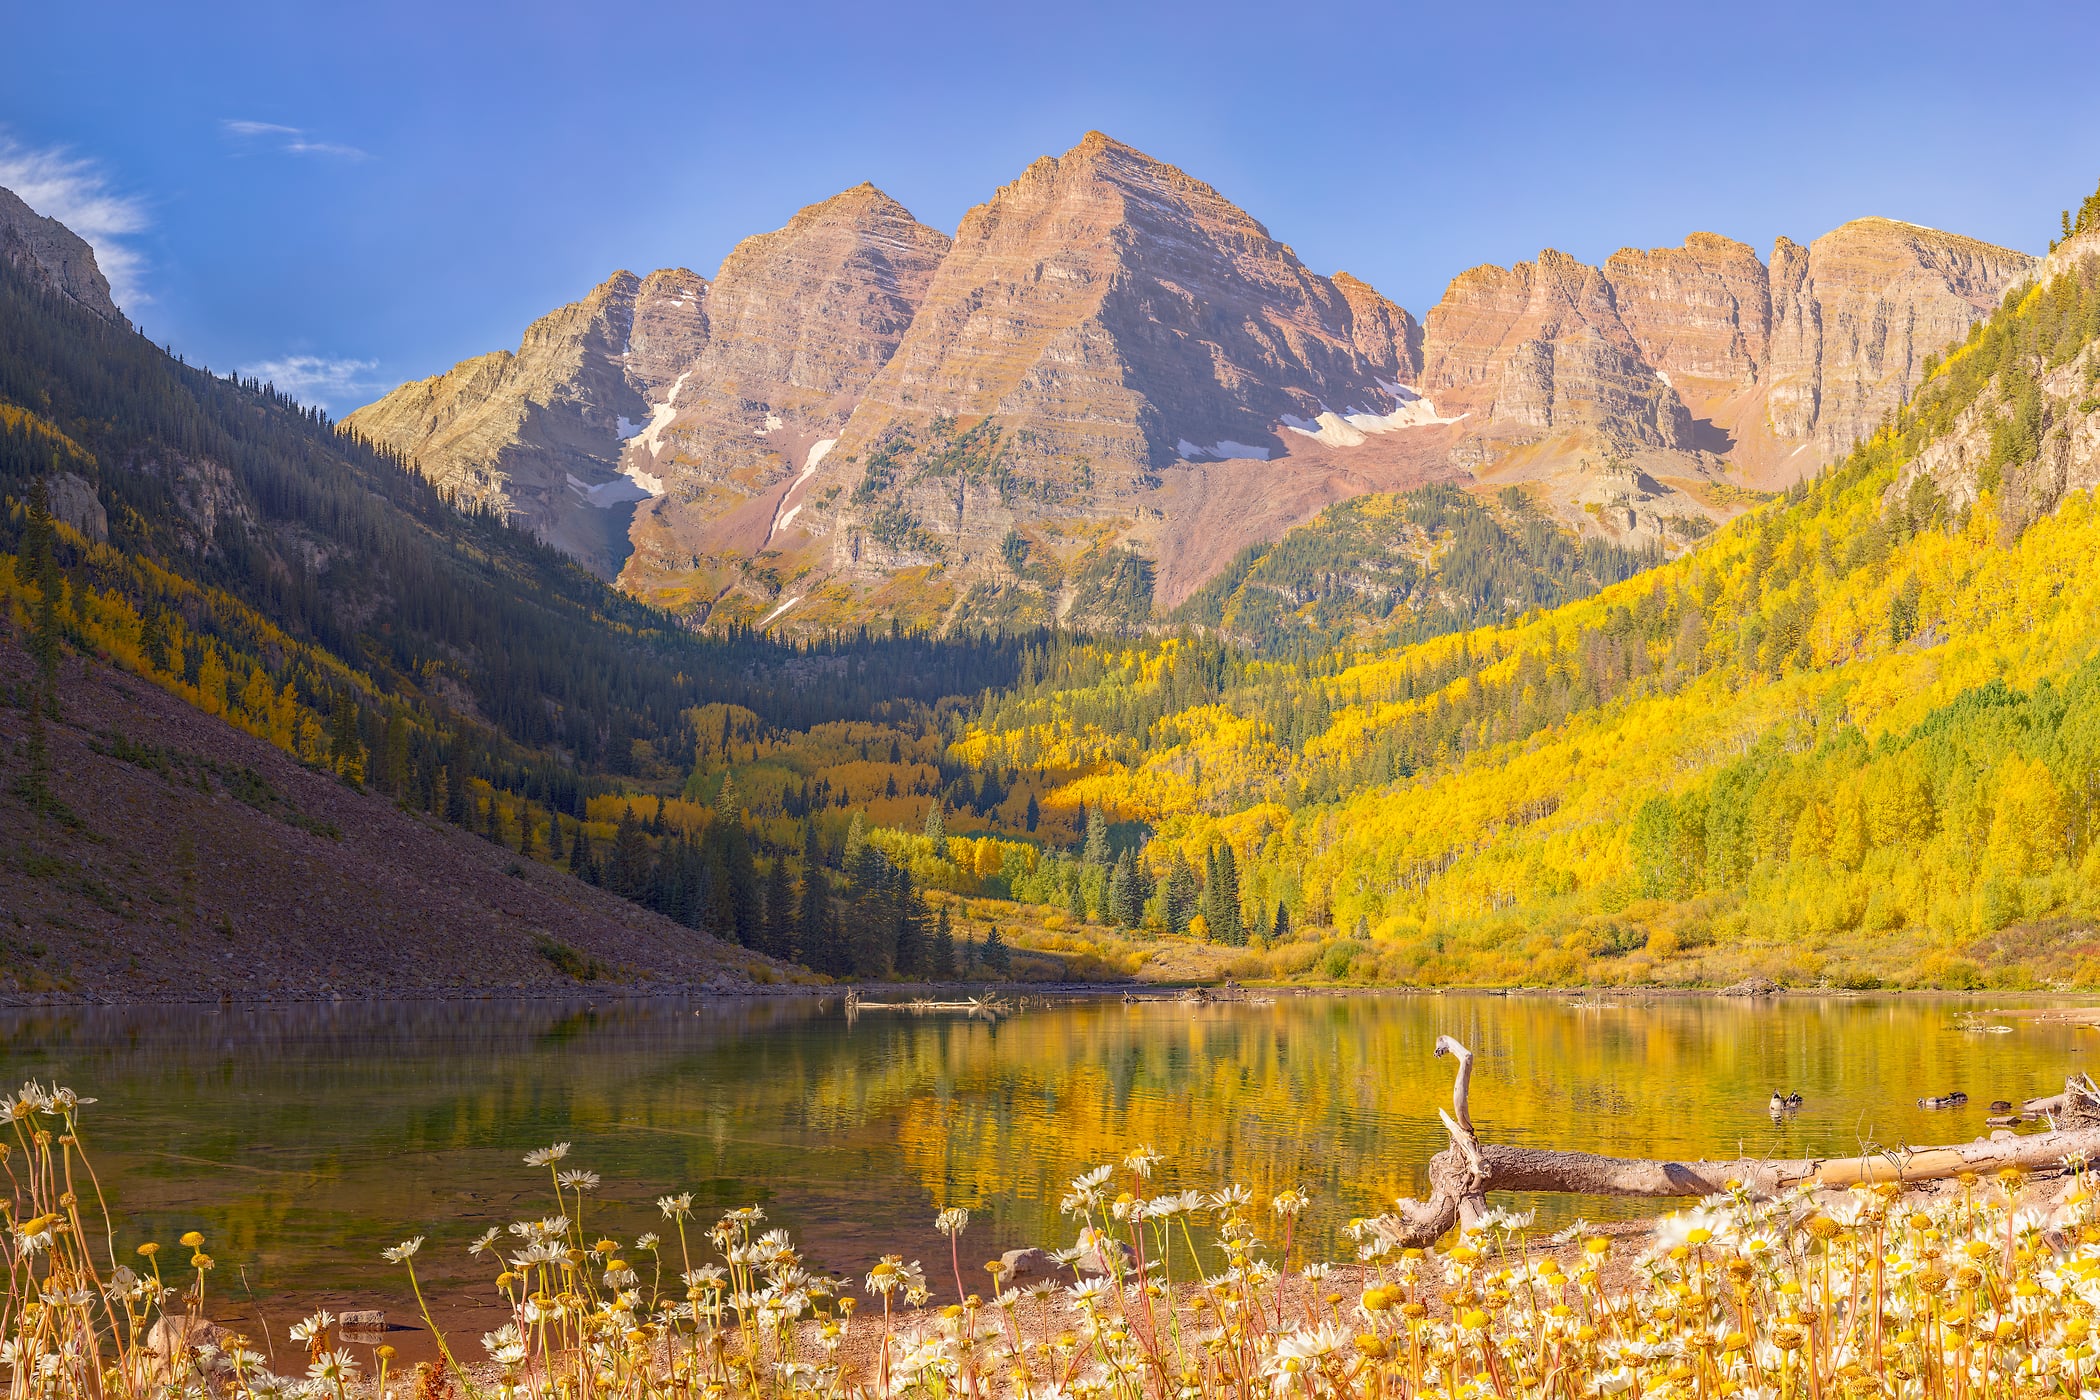 1,618 megapixels! A very high resolution, large-format VAST photo print of Maroon Lake and a mountain in Aspen, Colorado; landscape photograph created by John Freeman.